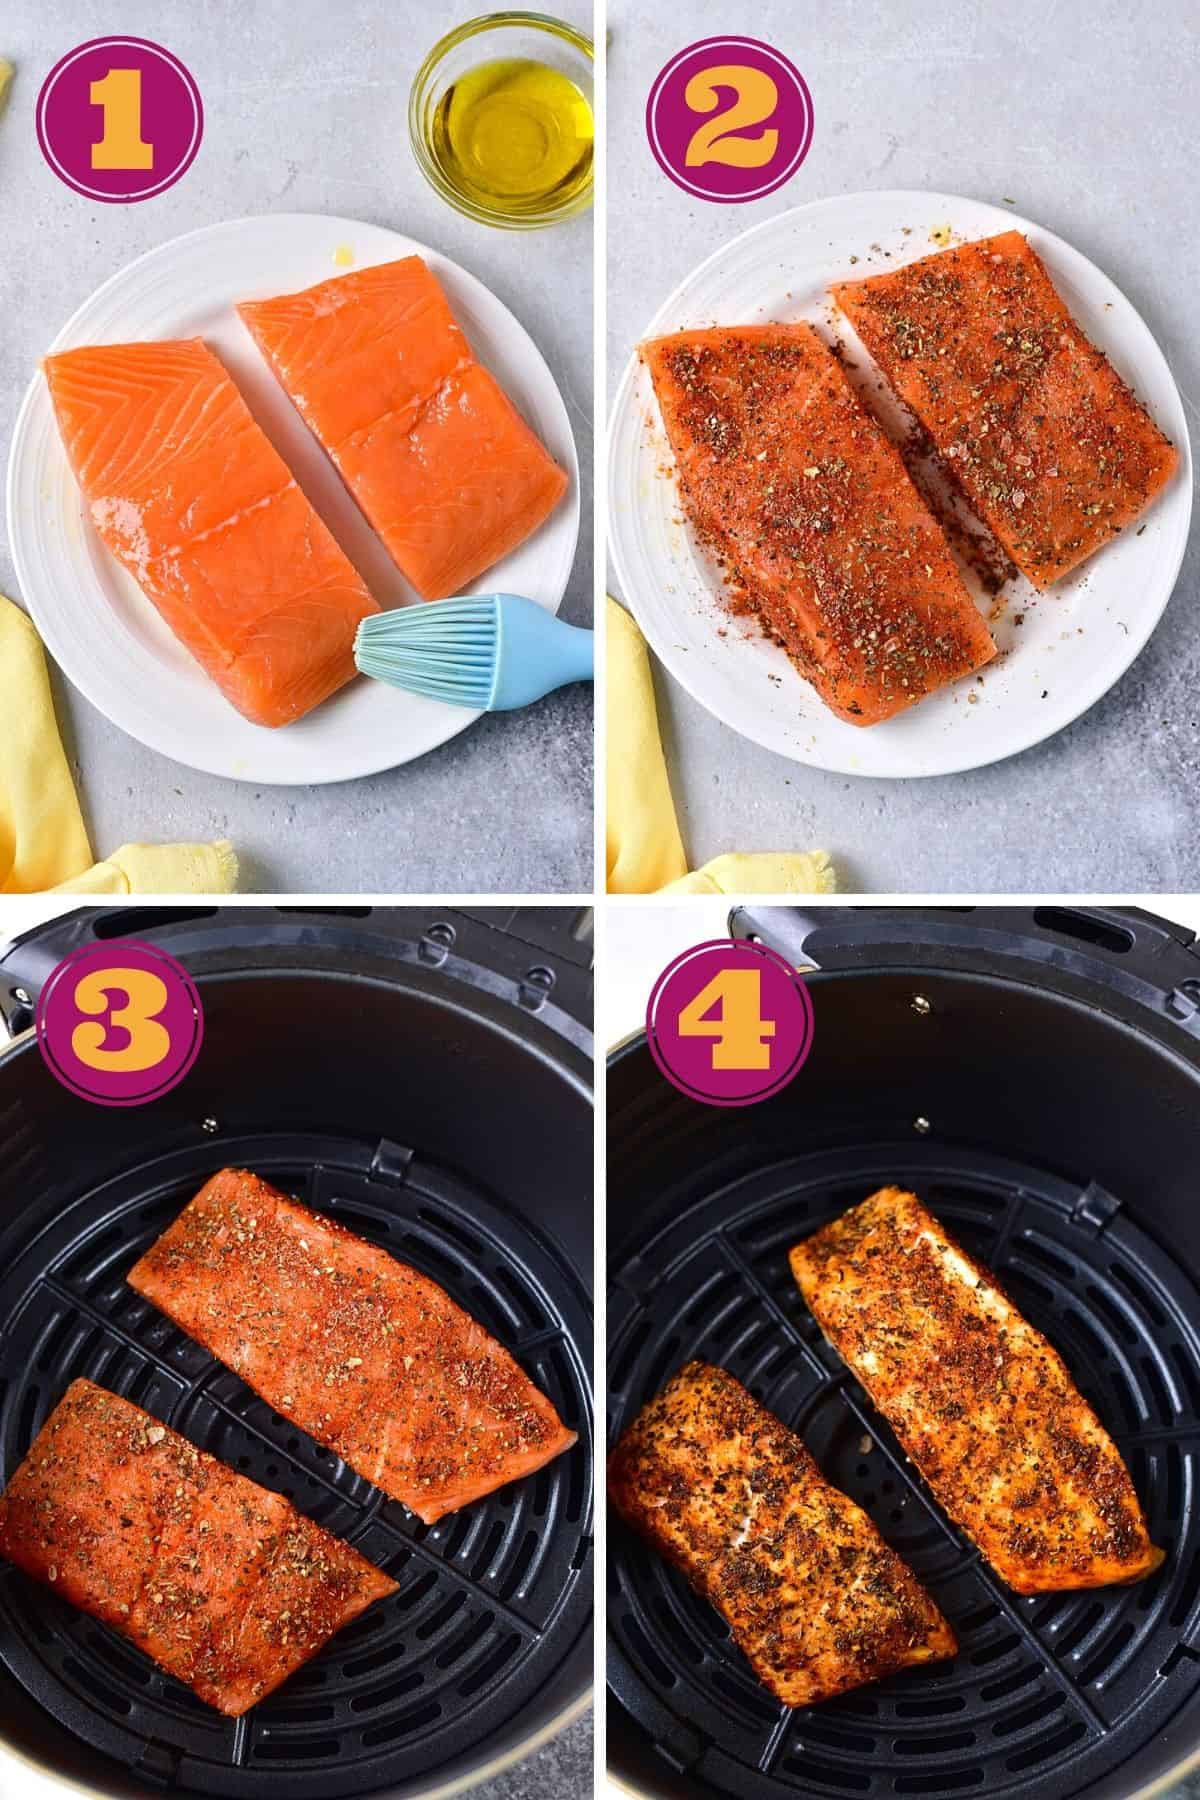 Four numbered pictures: first, two salmon filets on a plate, covered in olive oil, with a kitchen brush and a ramekin of oil; second, two salmon filets on a plate, covered in seasoning; third, two raw seasoned salmon fillets in an air fryer; and fourth, two cooked salmon fillets in an air fryer.